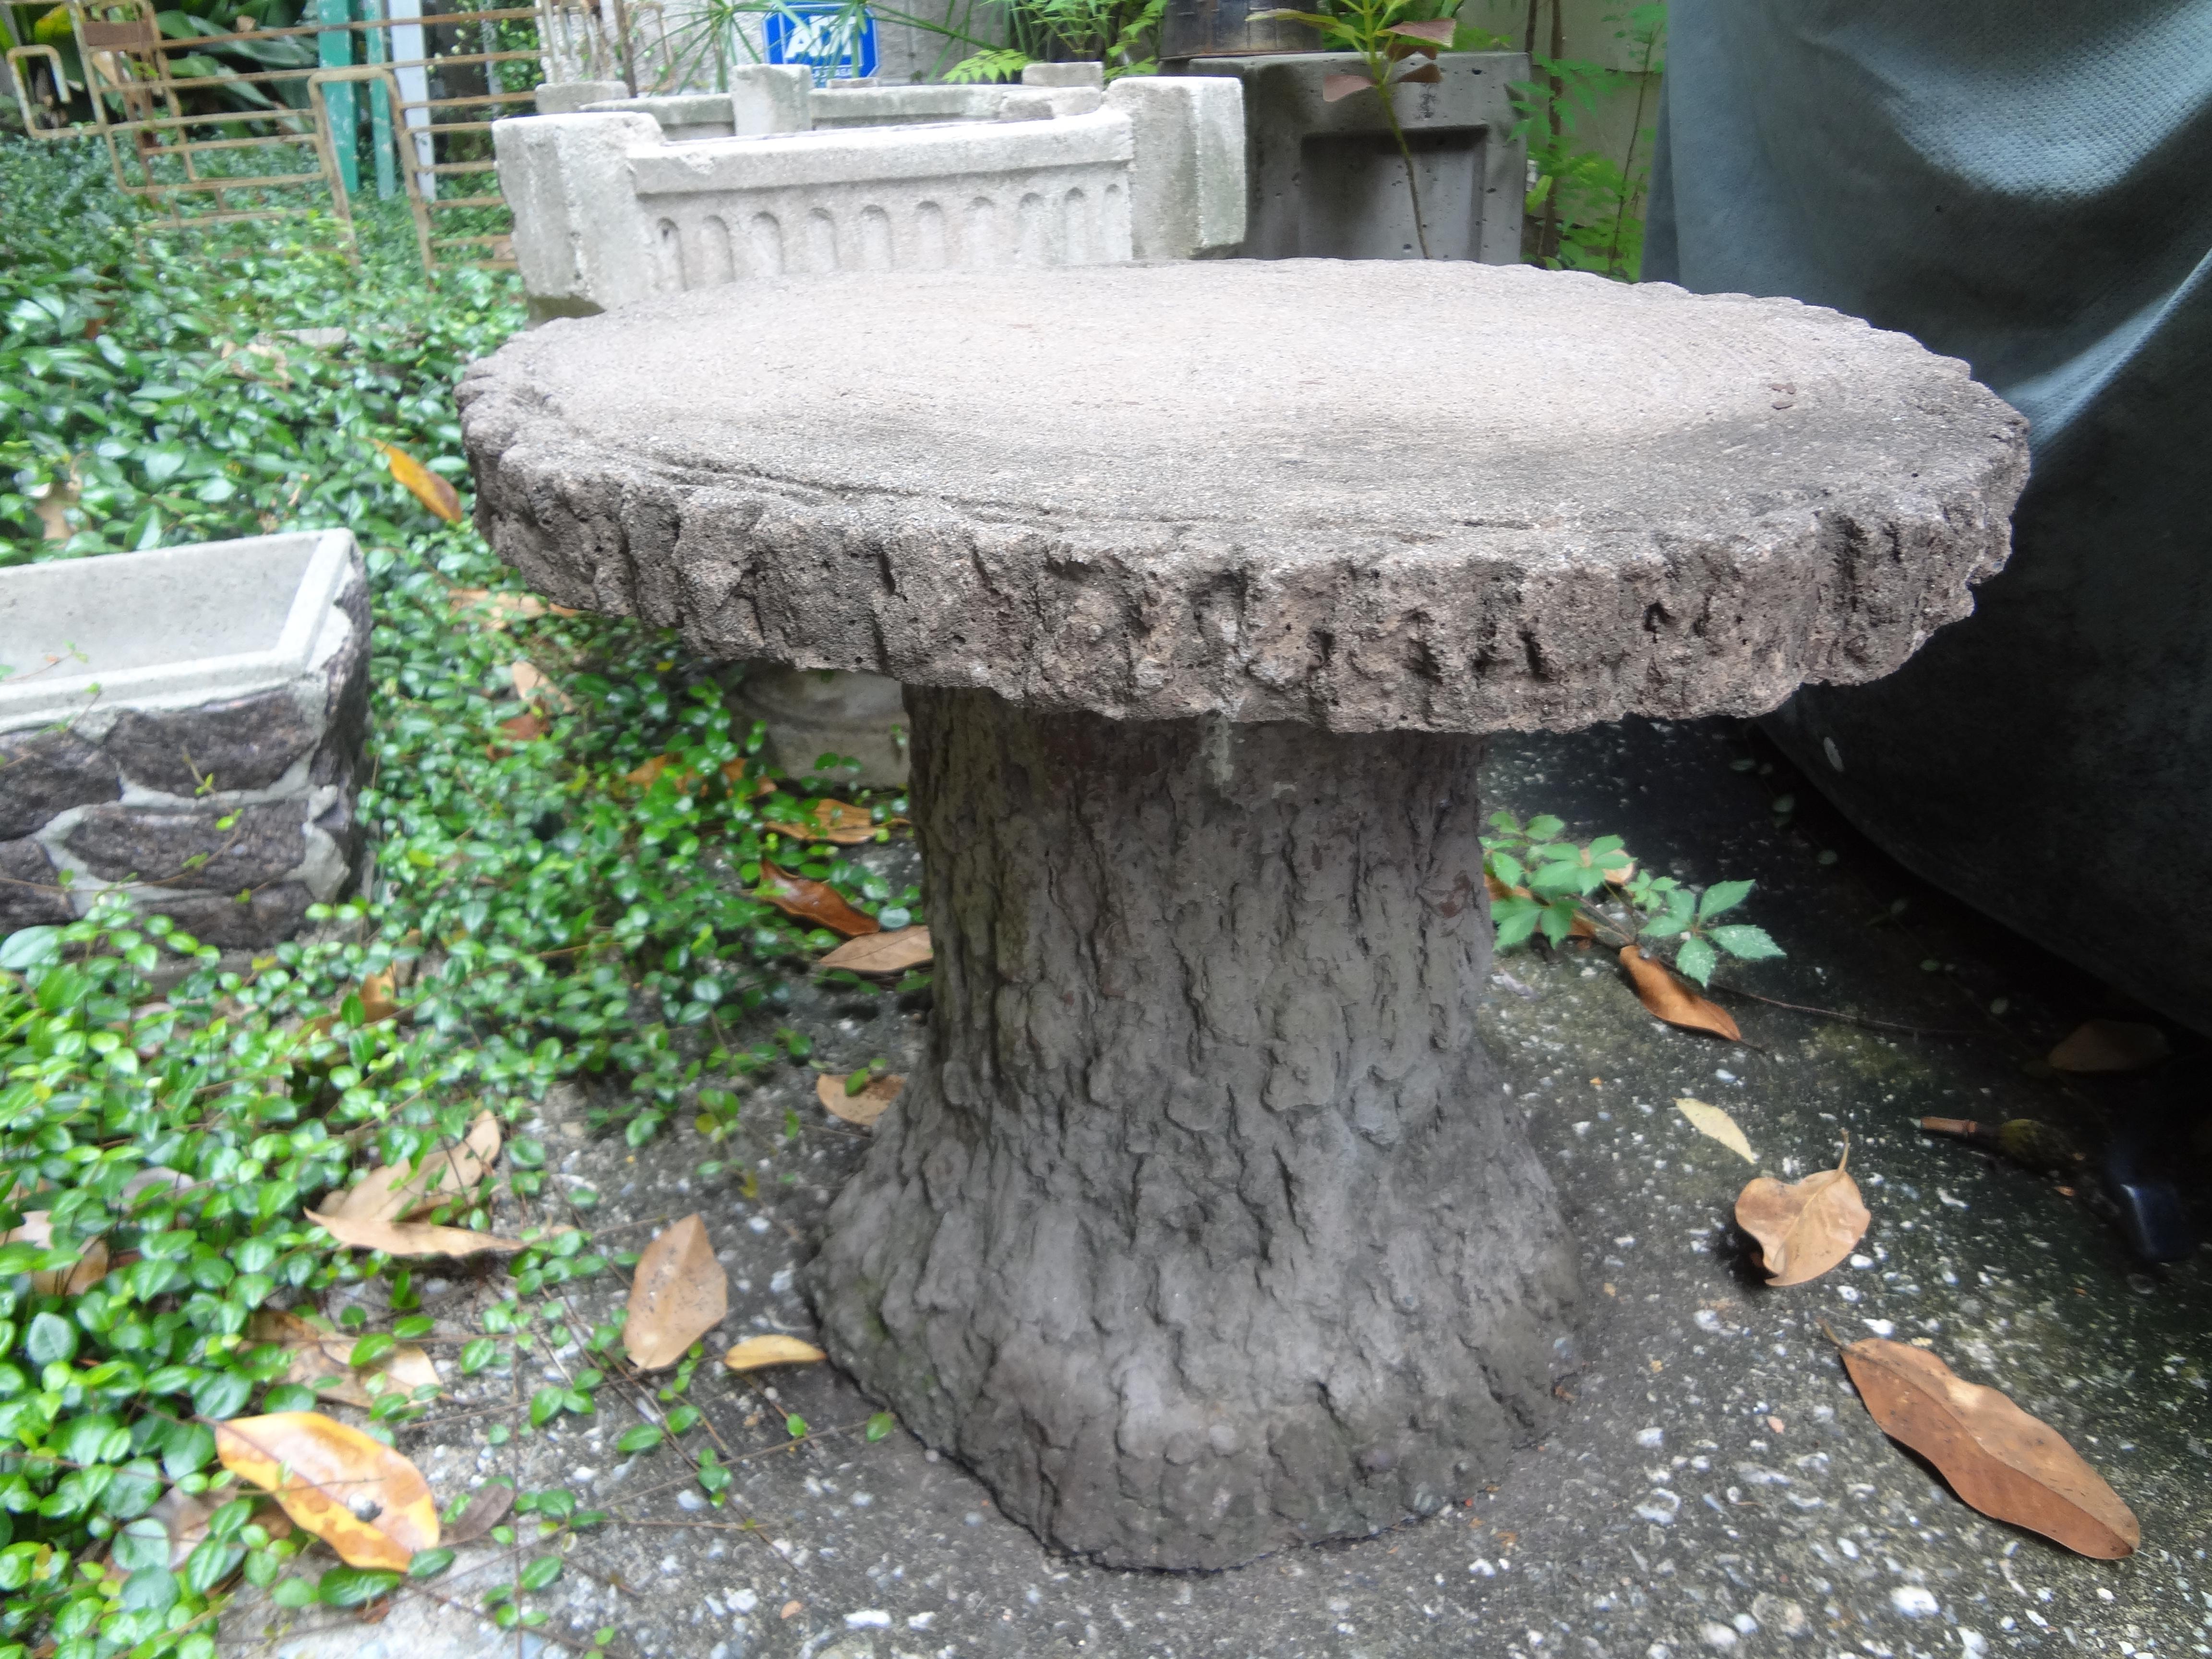 Interesting vintage French faux bois garden table or garden stool. This beautifully sculpted table has an organic modern look to it with the appearance of real tree bark. This great faux bois table would work equally well outdoors as garden accent